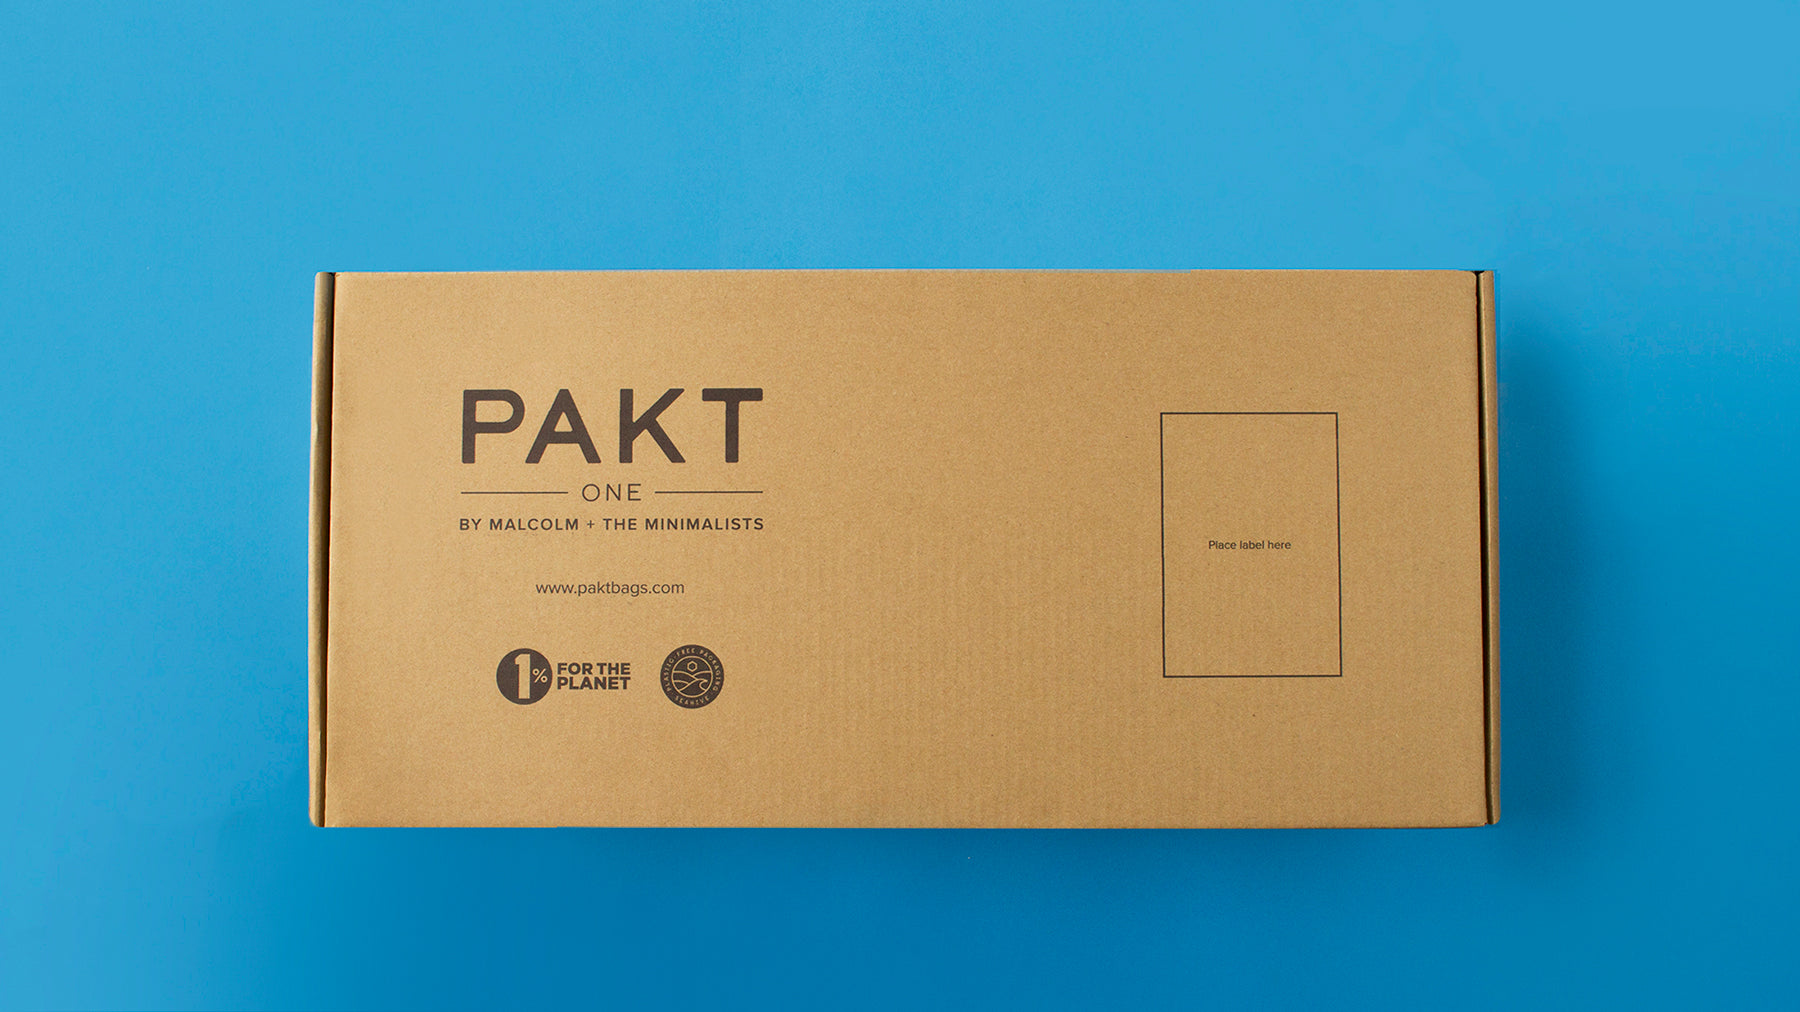 Pakt + SeaHive's Guide to Plastic-Free Packaging